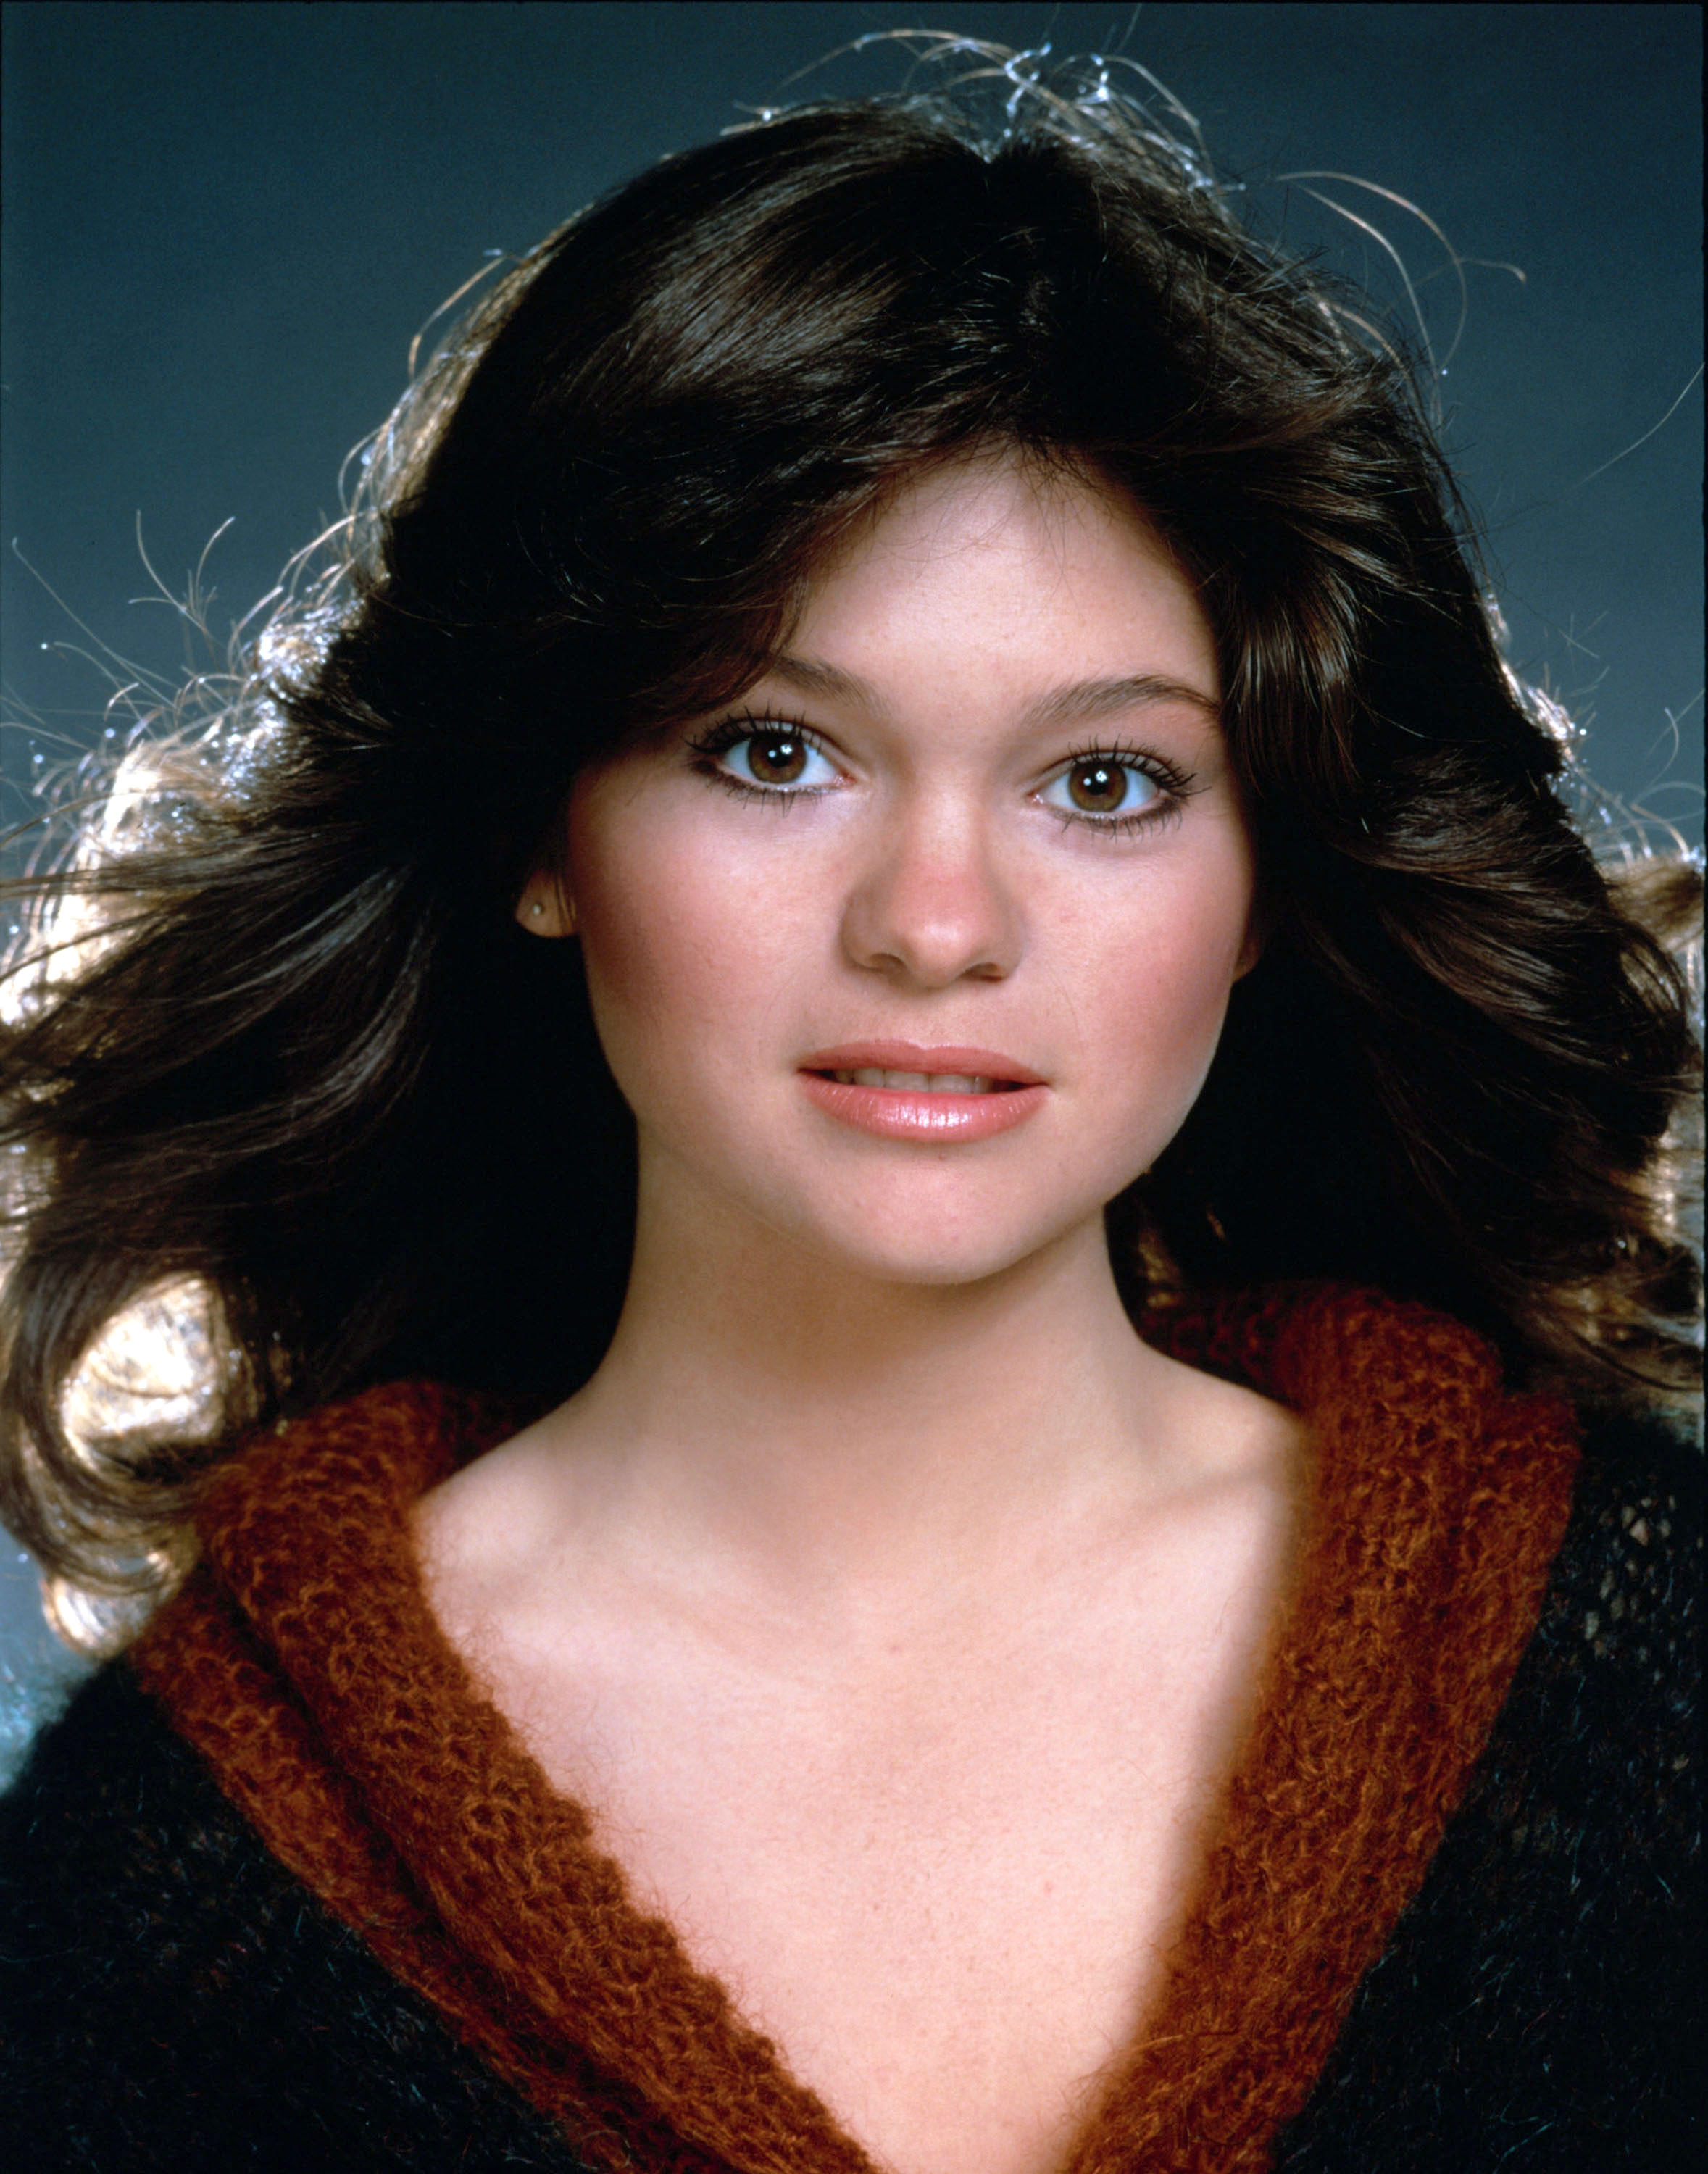 Valerie Bertinelli in 1979 | Source: Getty Images